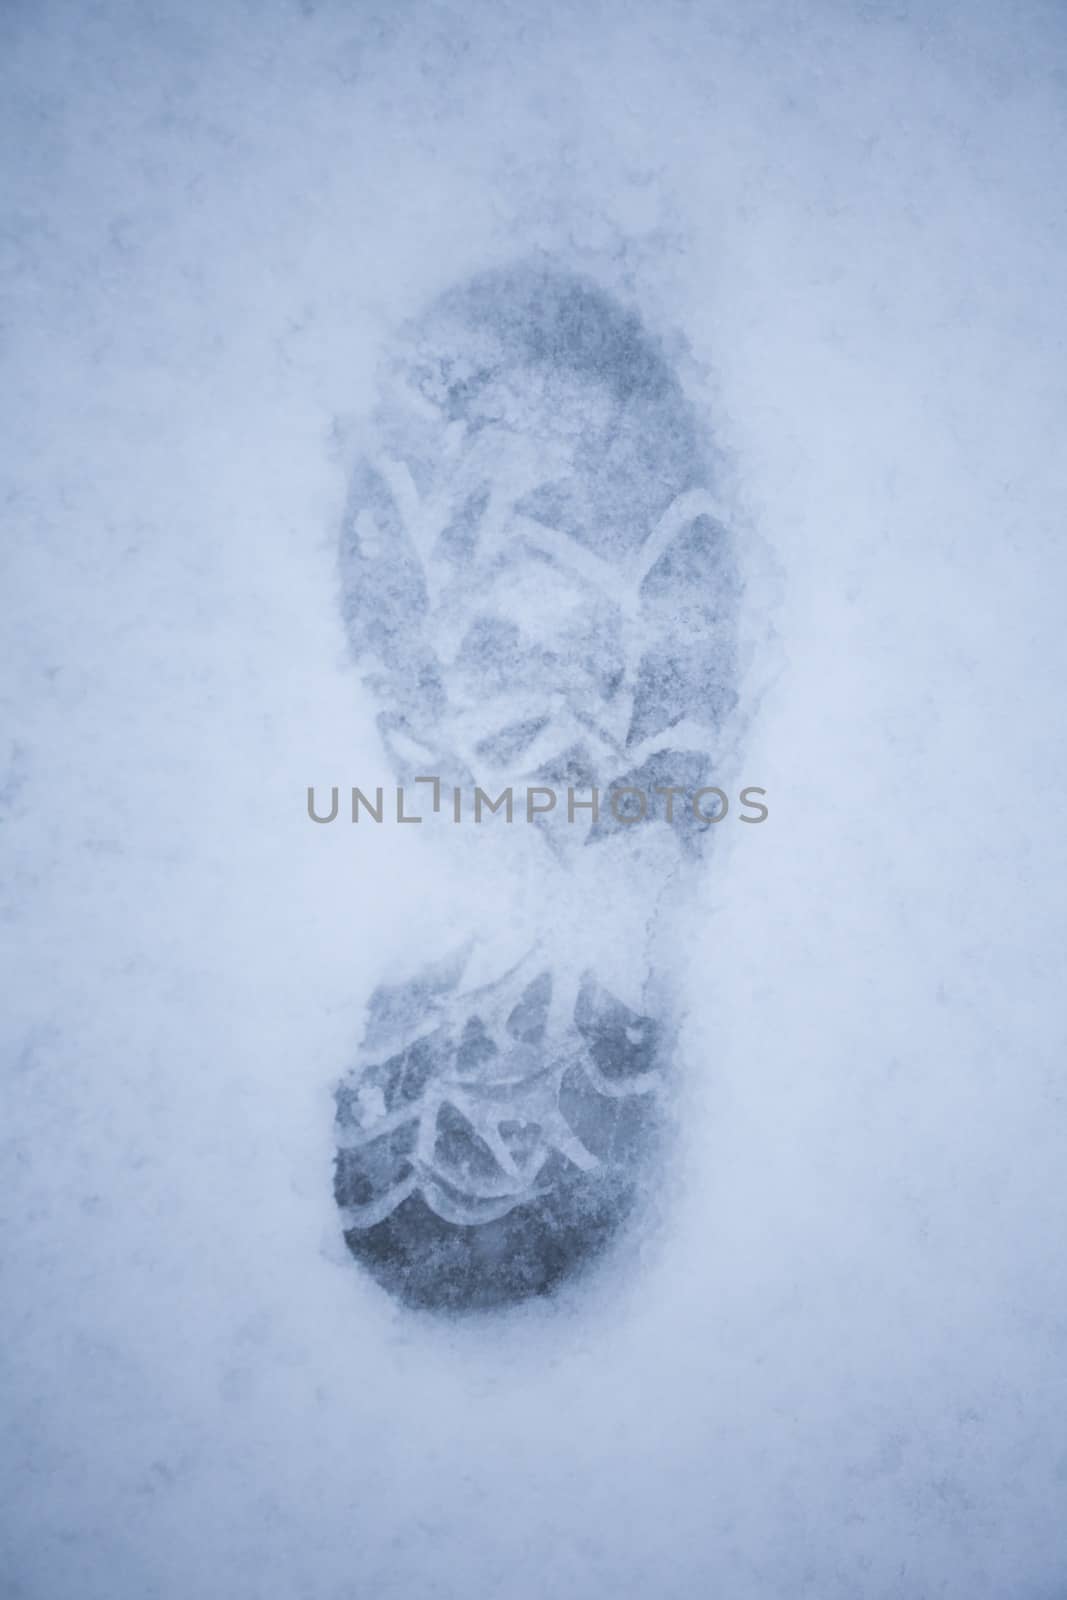 A single footprint in the snow